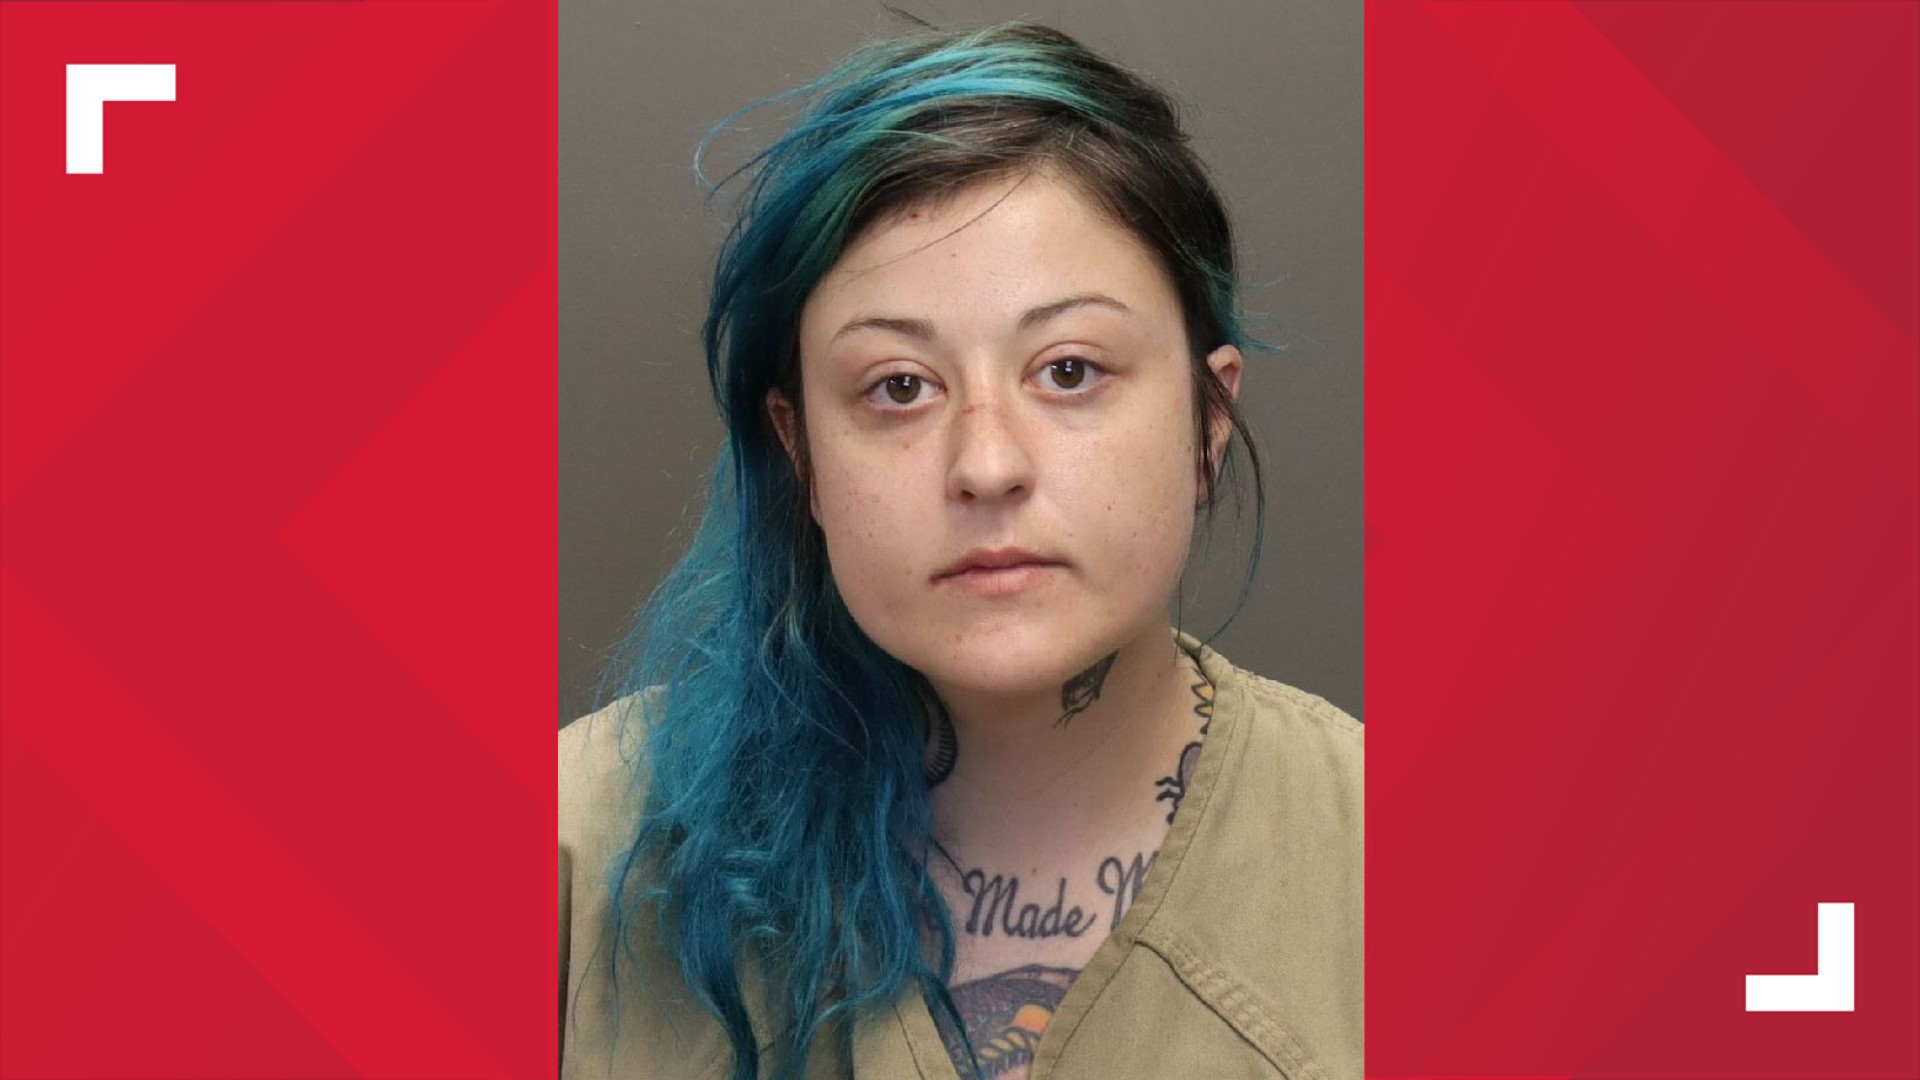 Alea Weil pleaded guilty to aggravated vehicular assault and possession of a fentanyl-related compound.